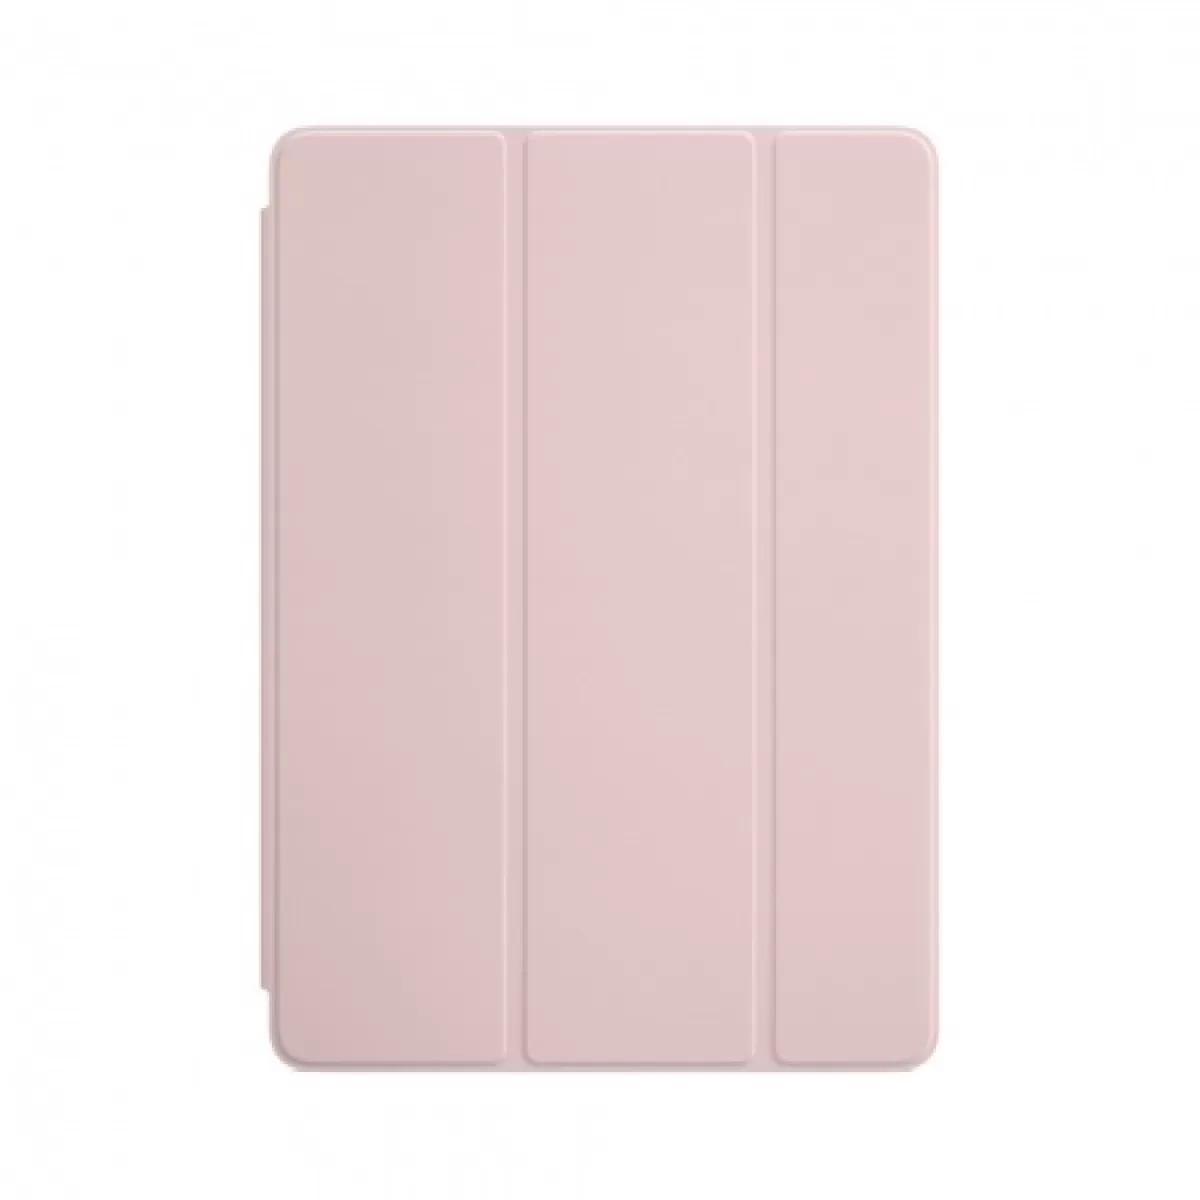 Apple 9.7inch iPad (5th gen) Smart Cover Pink Sand